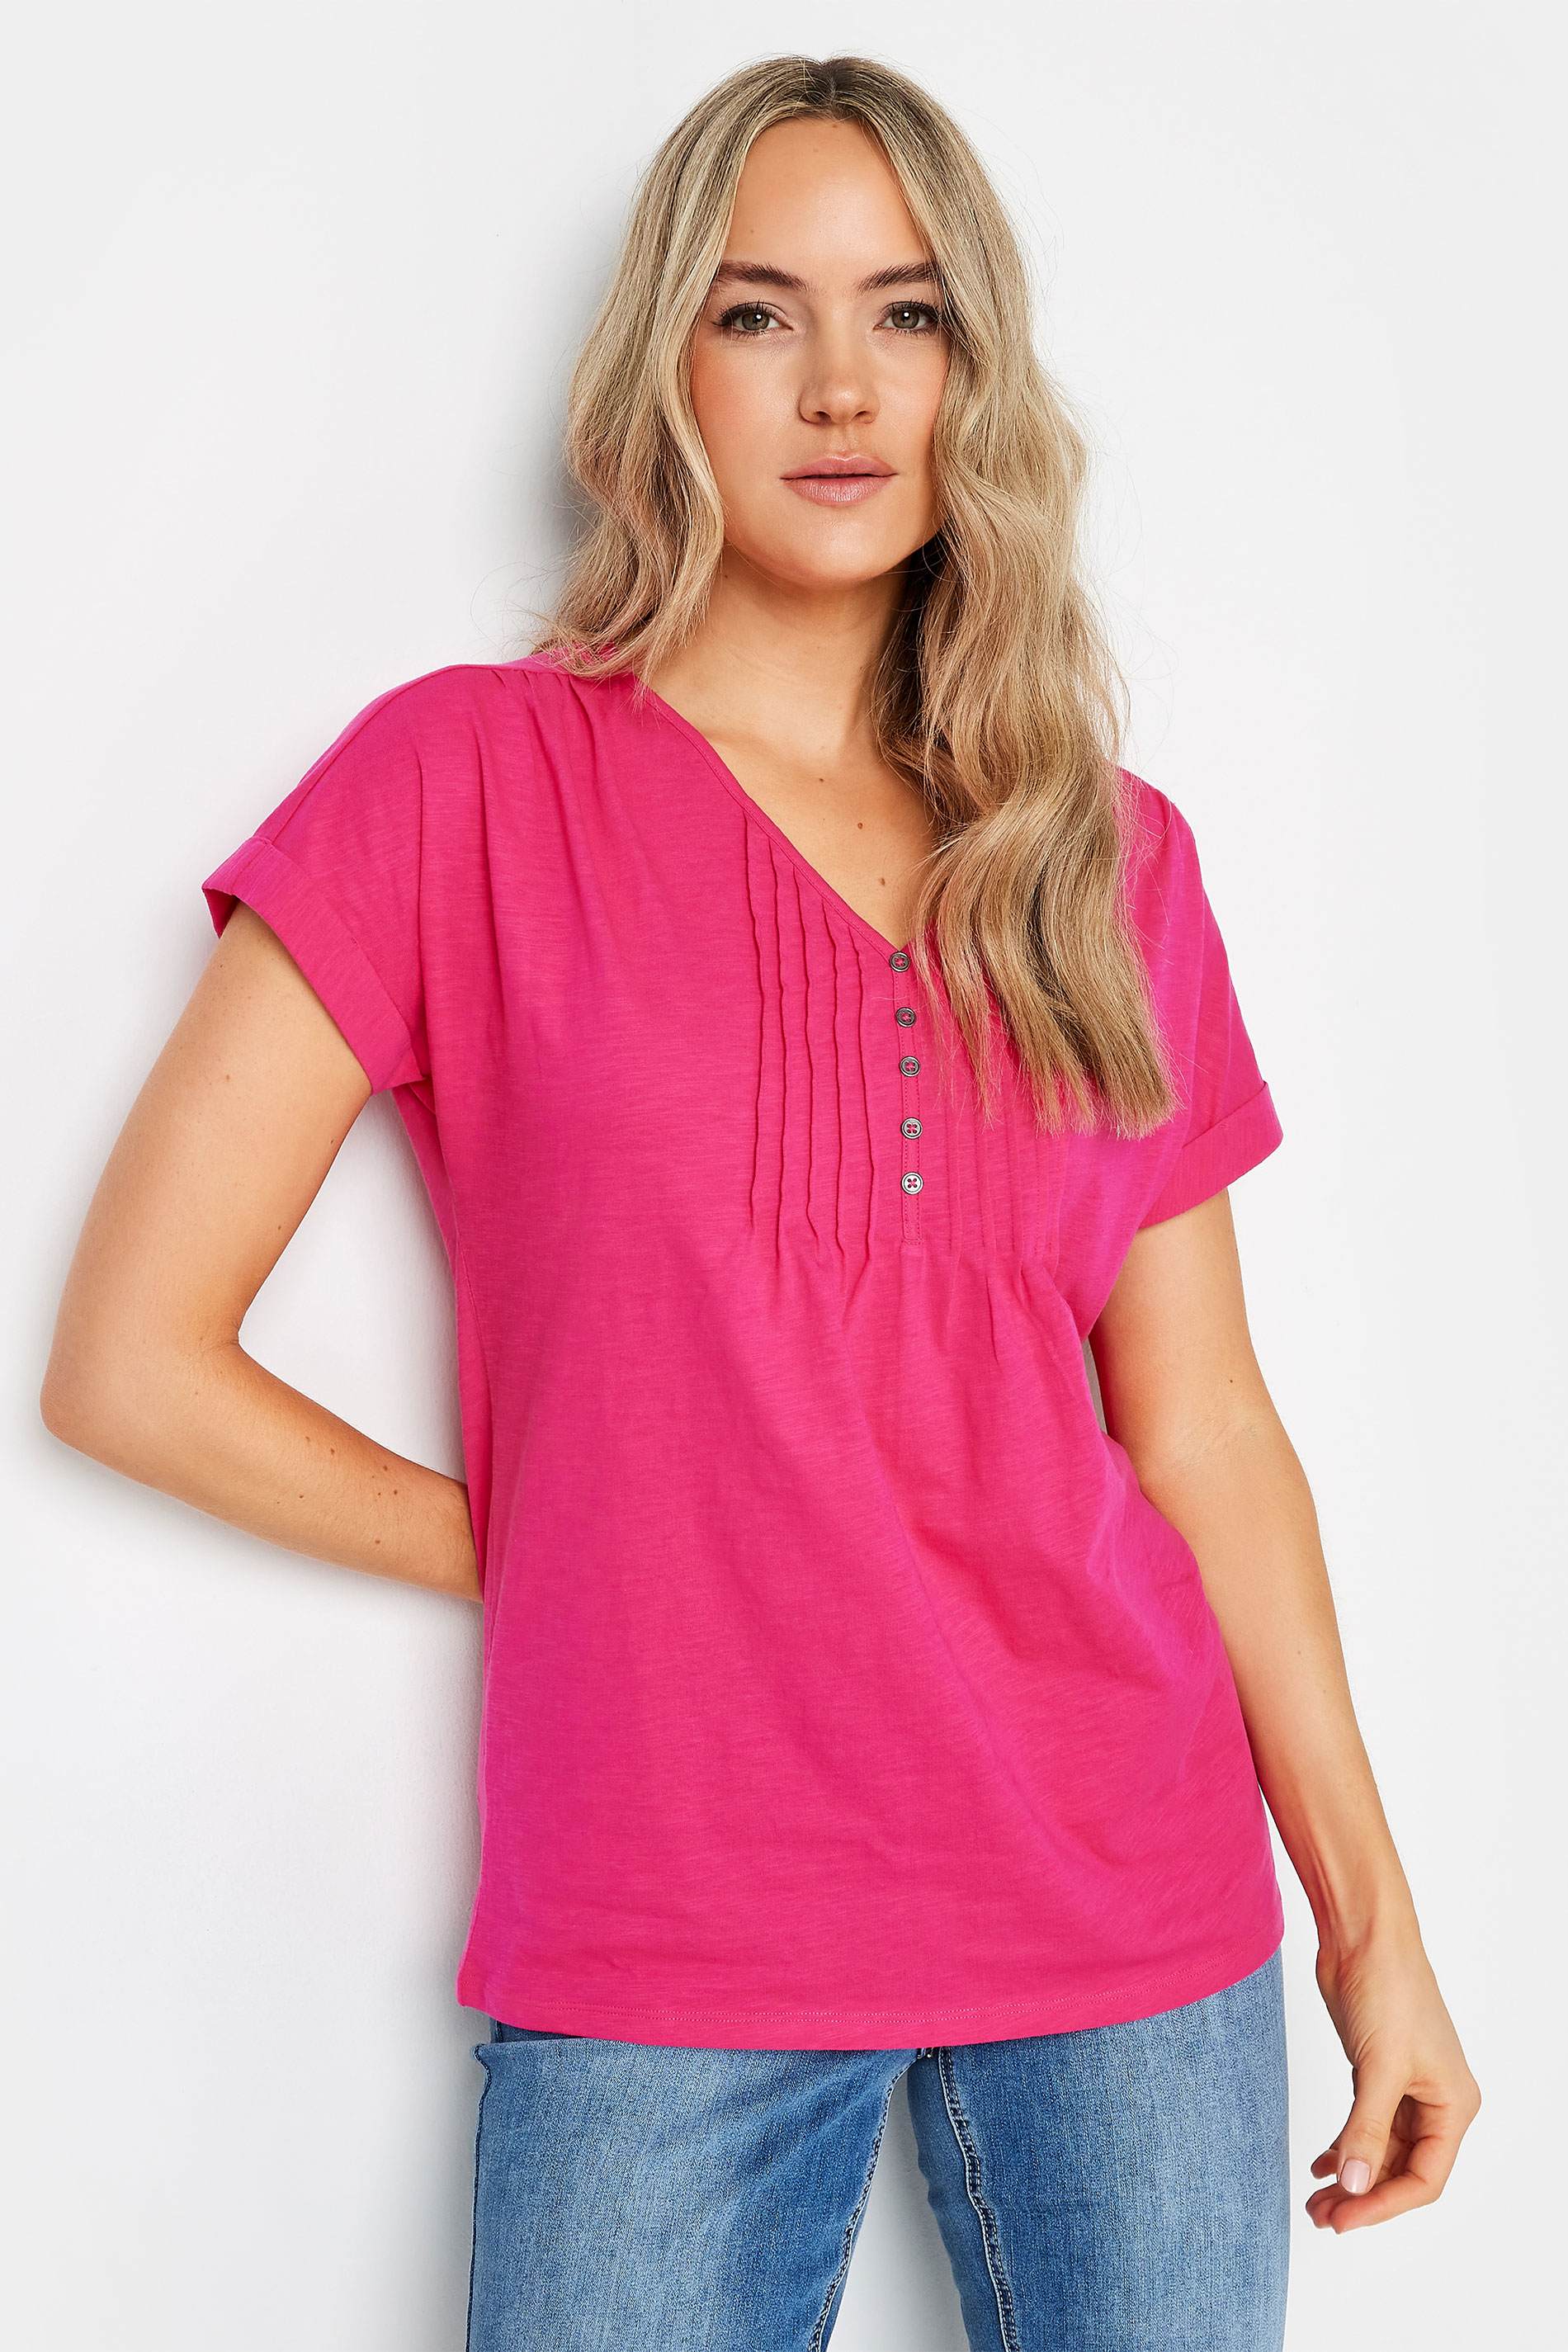 LTS 2 PACK Tall Women's Bright Pink & White Cotton Henley T-Shirts | Long Tall Sally 2